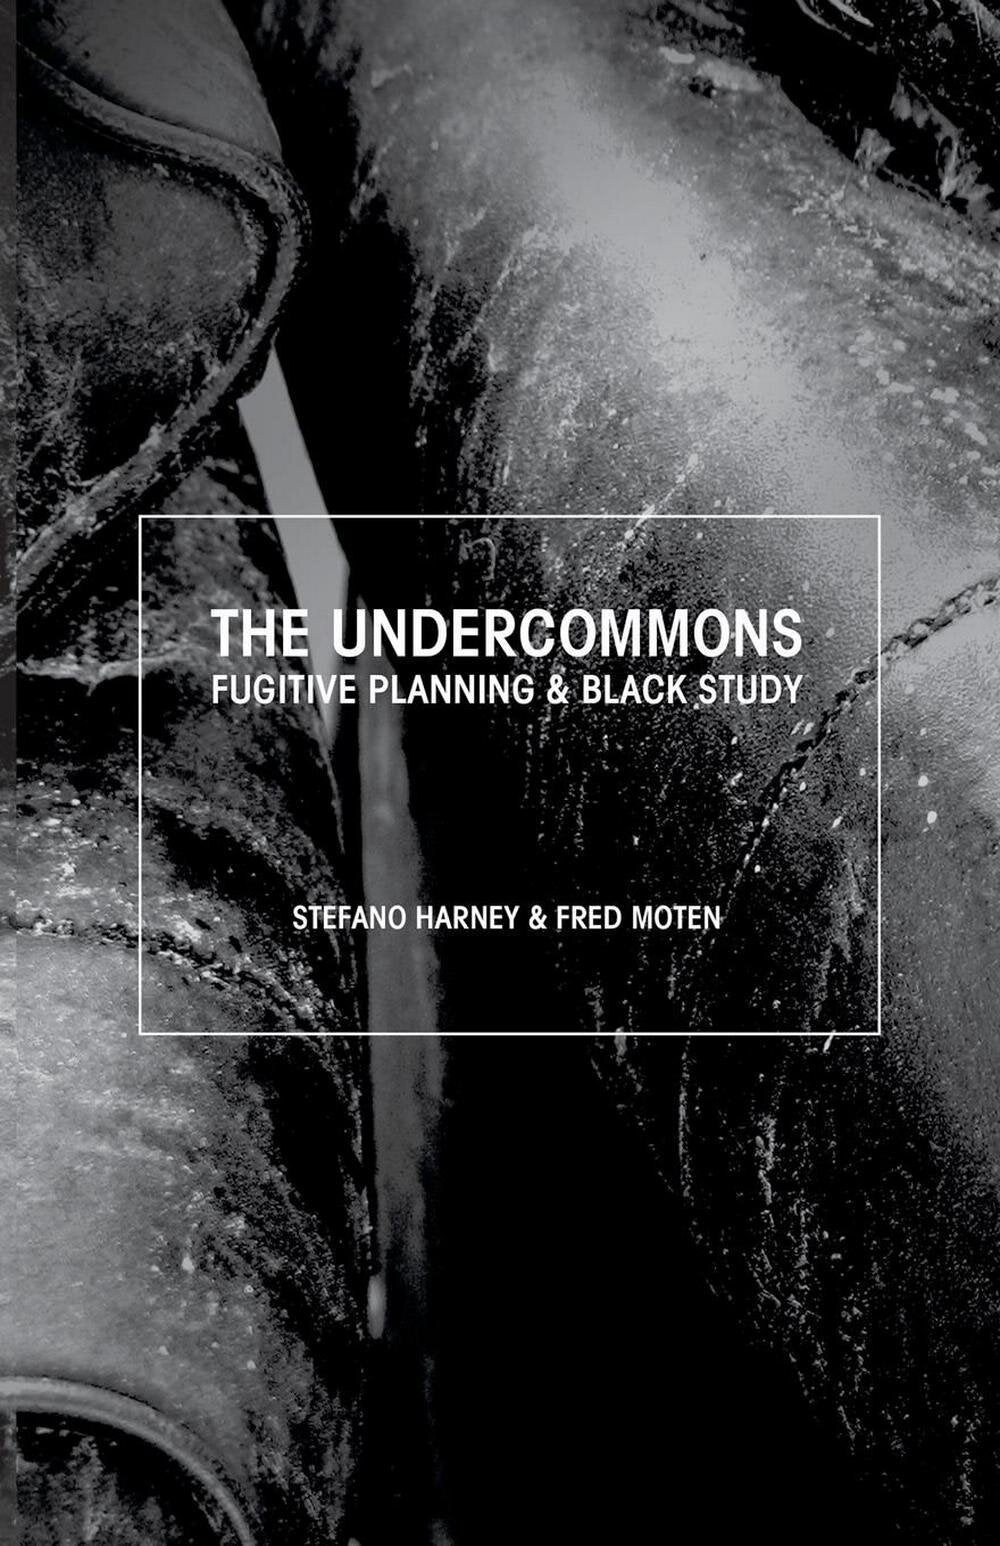 The Undercommons: Fugitive Planning & Black Study by Stefano Harney, Fred Moten